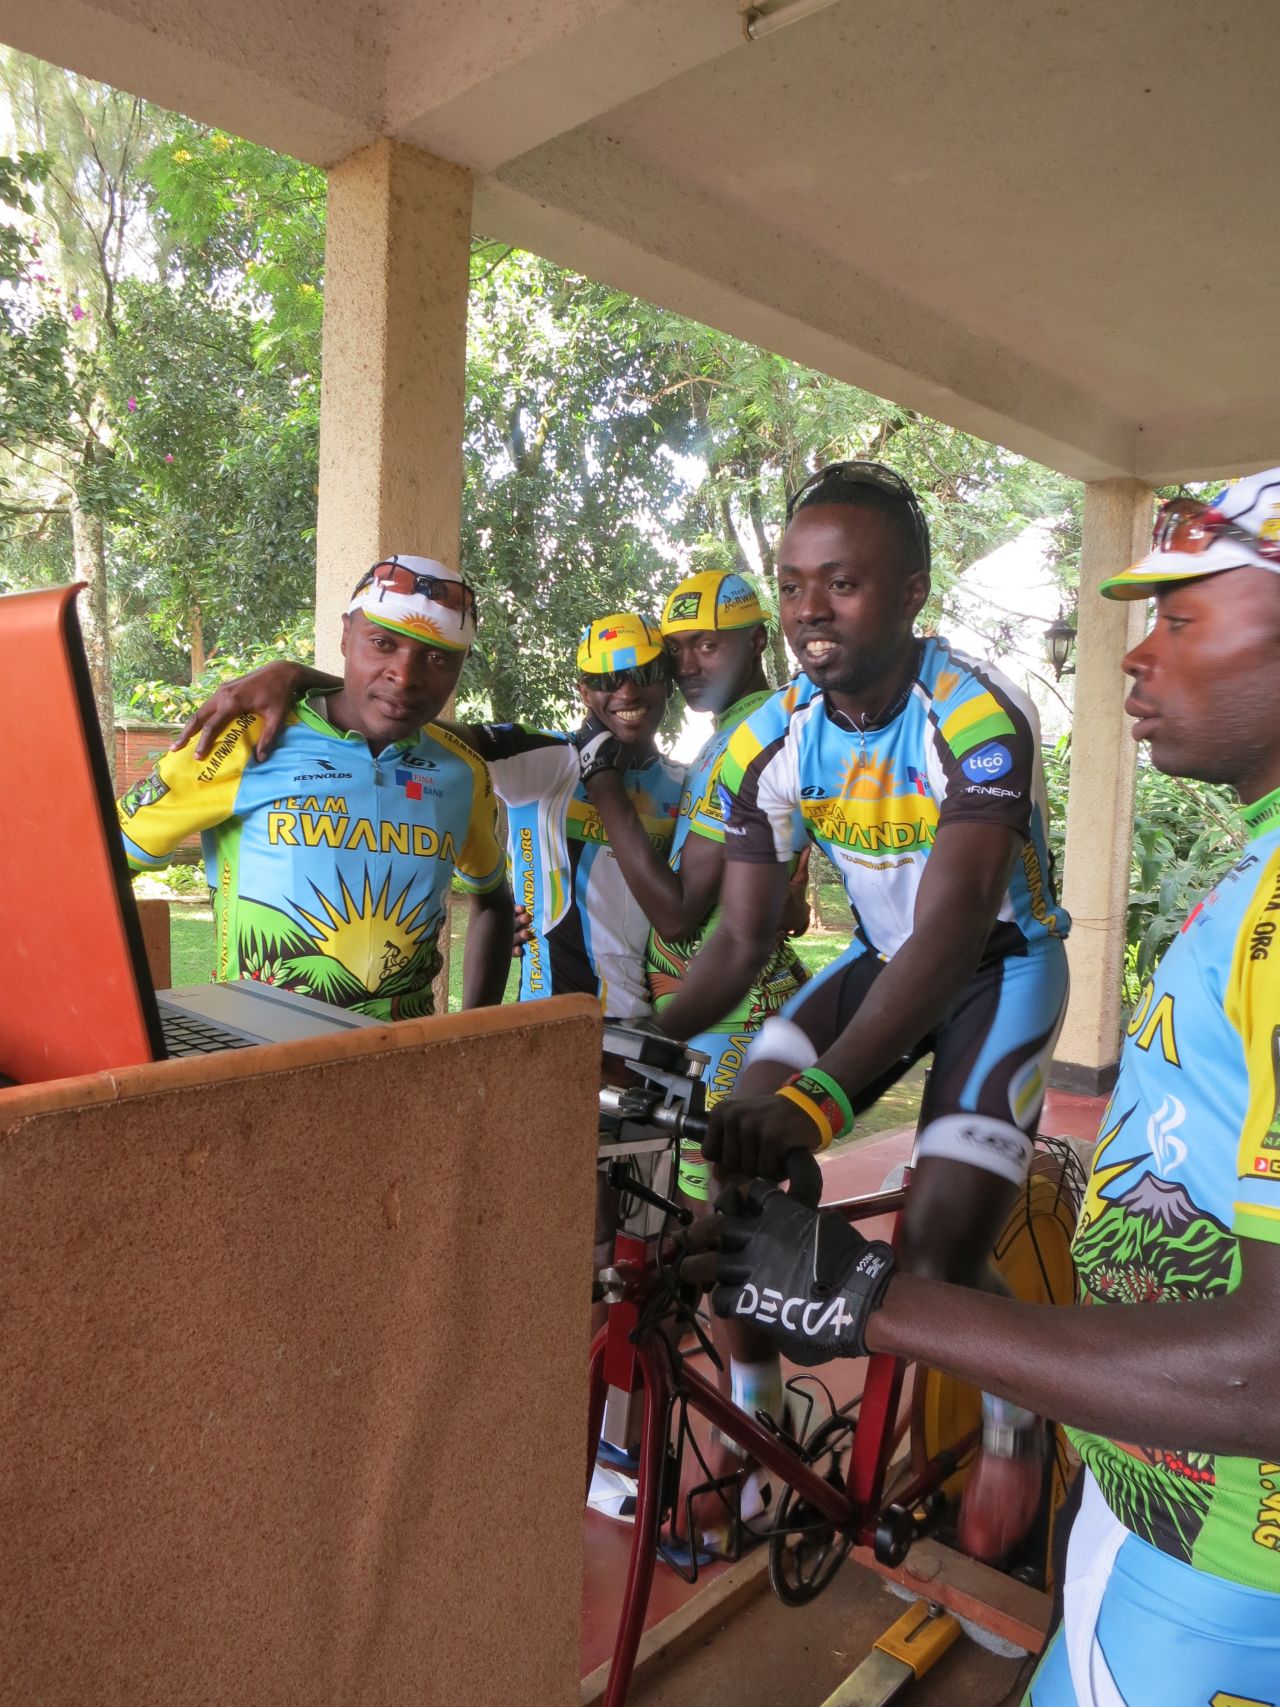 Team Rwanda's Rafiki Uwimana on a velotron, which measures energy output in watts, to give an indication of a rider's competitive potential.